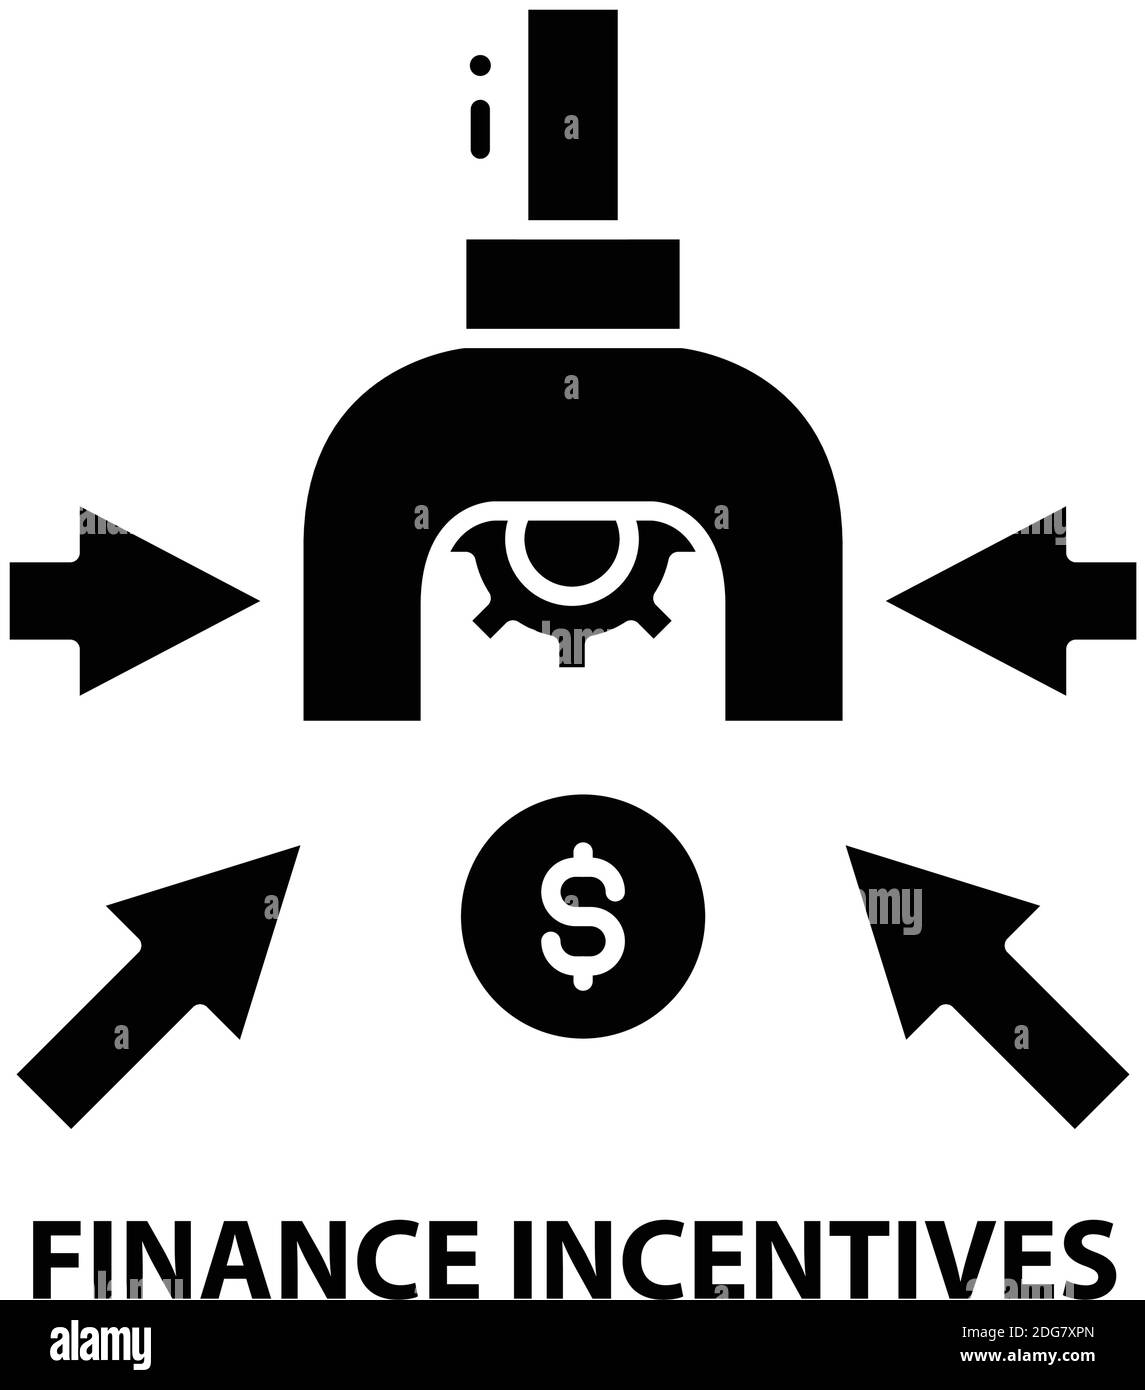 finance incentives icon, black vector sign with editable strokes, concept illustration Stock Vector